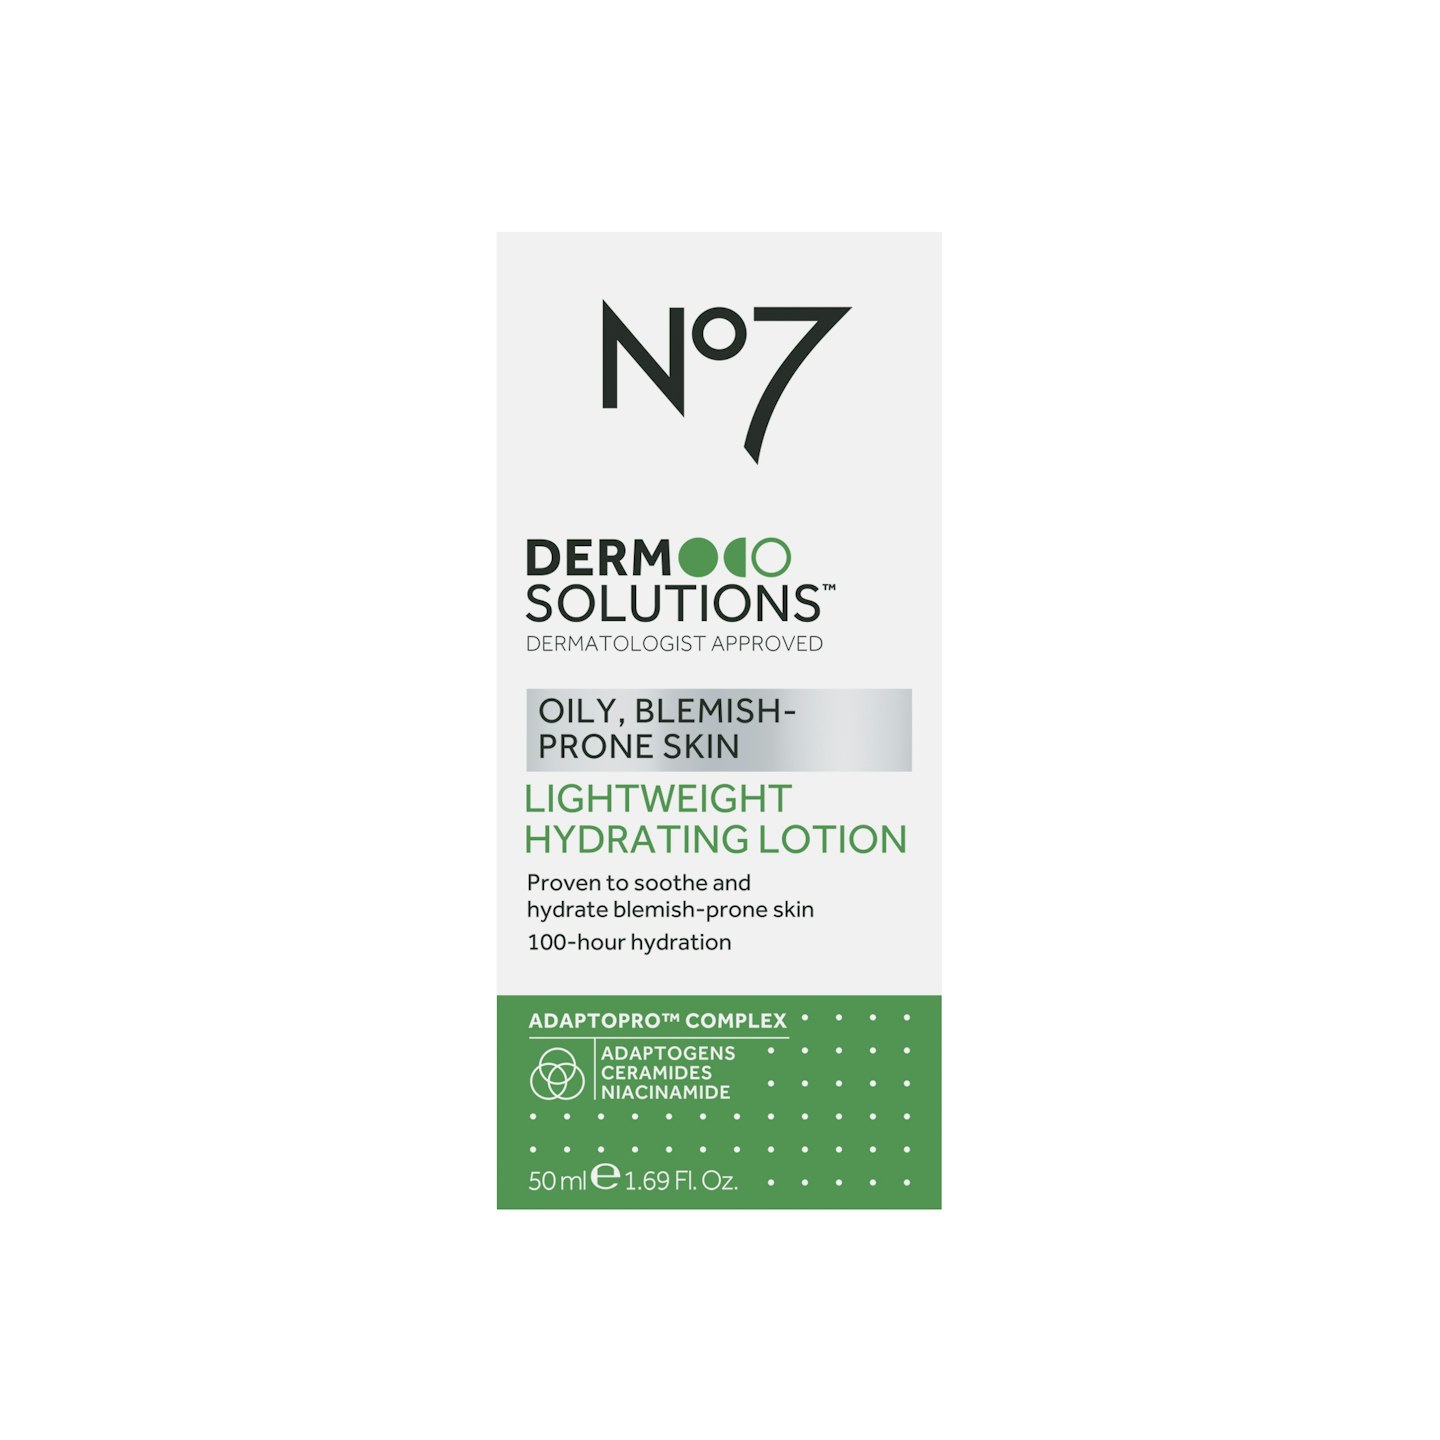 No7 enters the Healthy Skin category with launch of new Derm